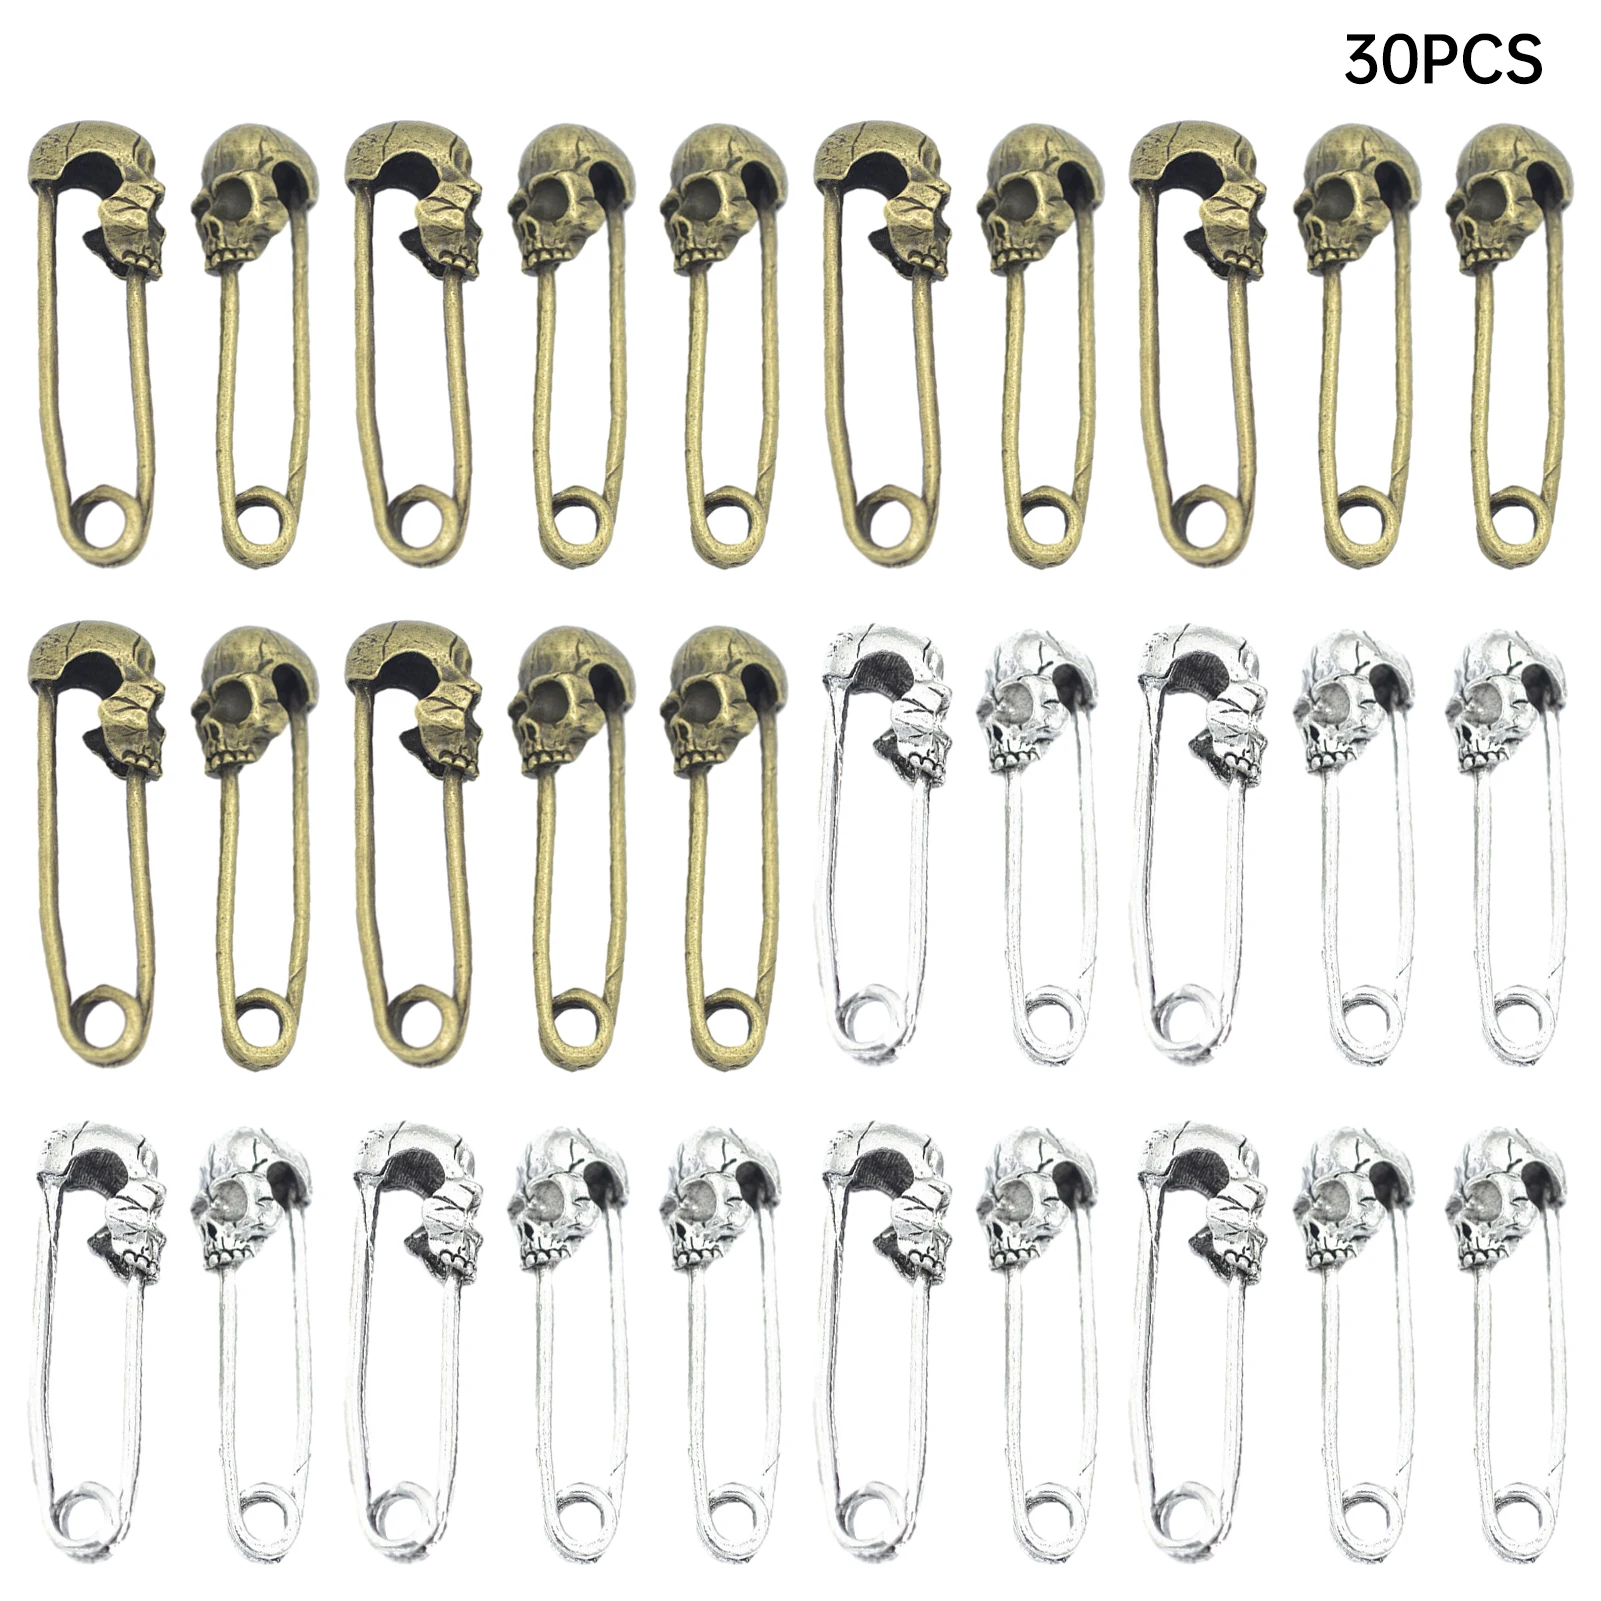 

30pcs Retro Silver 2 Colors Necklace Home Skull Pendant Jewelry Making Antique Bronze Halloween Decor Brooch Shaped Keychains